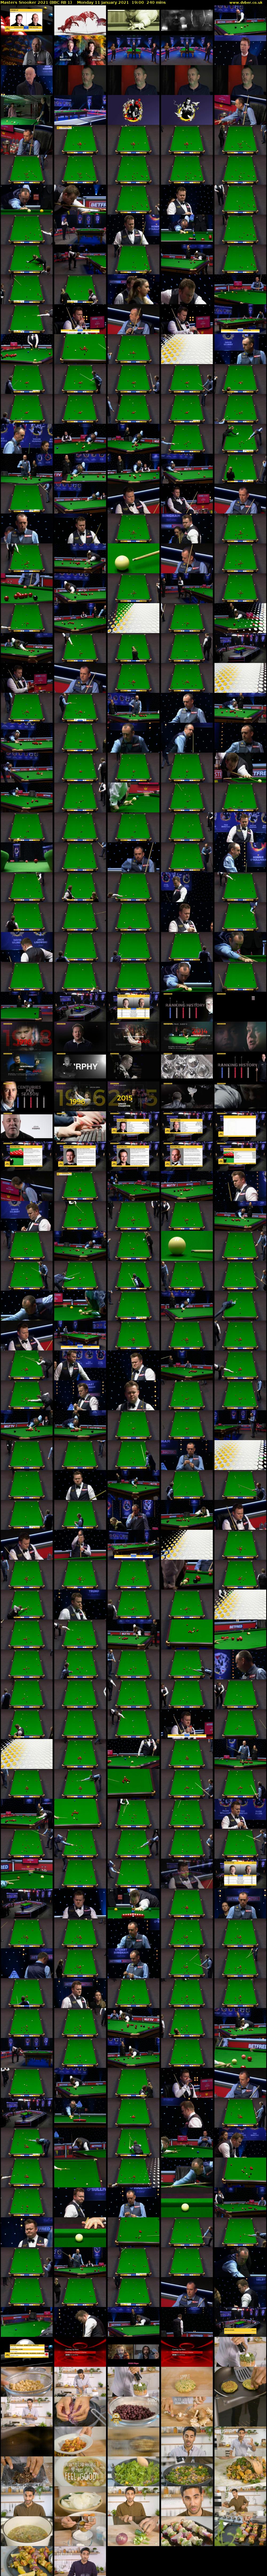 Masters Snooker 2021 (BBC RB 1) Monday 11 January 2021 19:00 - 23:00